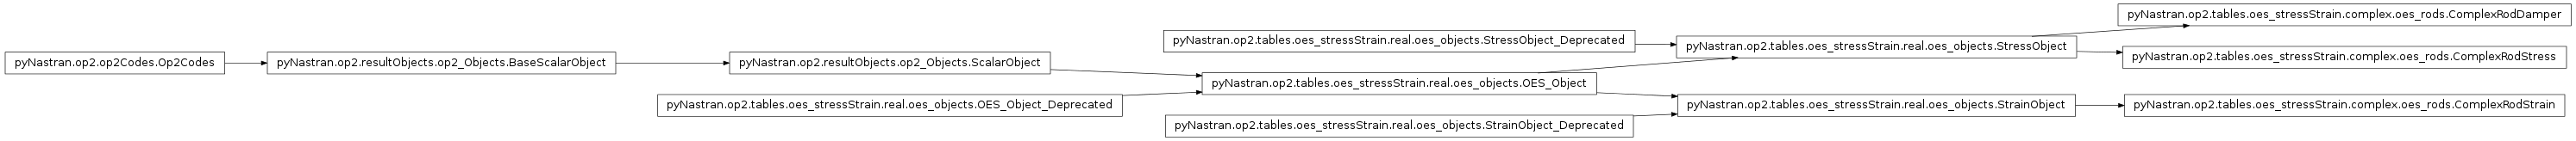 Inheritance diagram of pyNastran.op2.tables.oes_stressStrain.complex.oes_rods